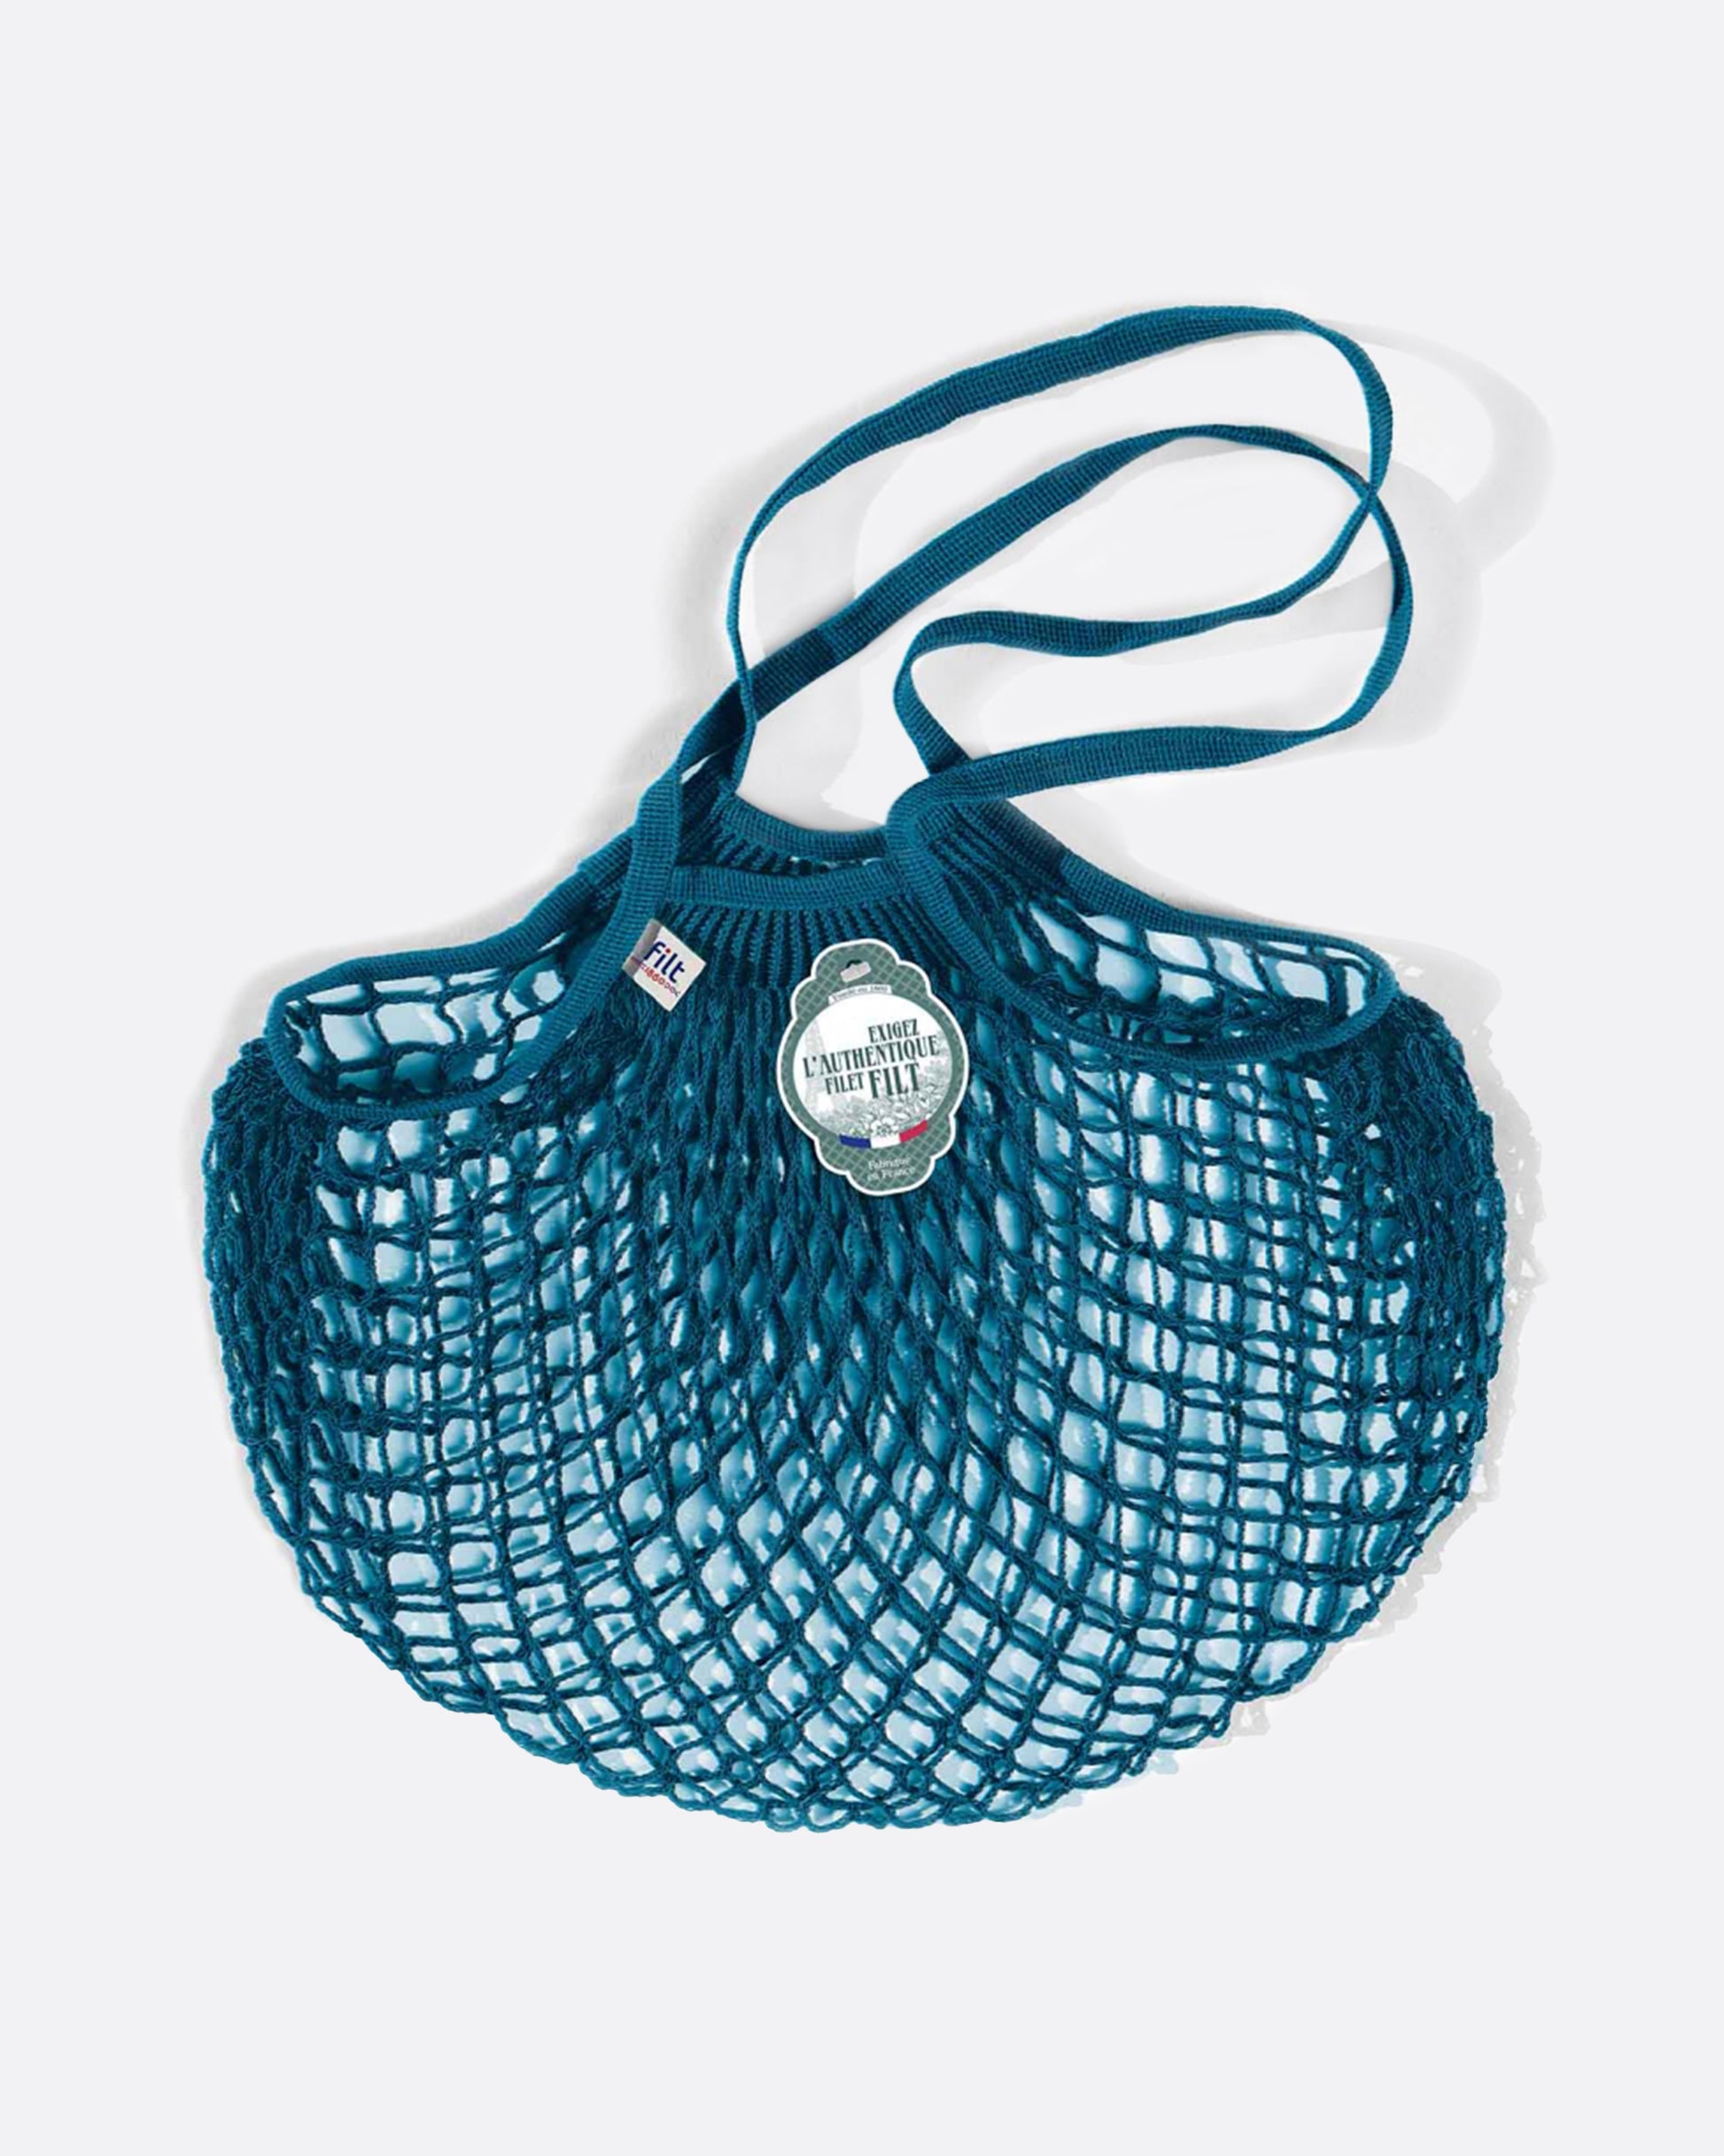 The deep blue bag is great for grocery shopping or the beach!